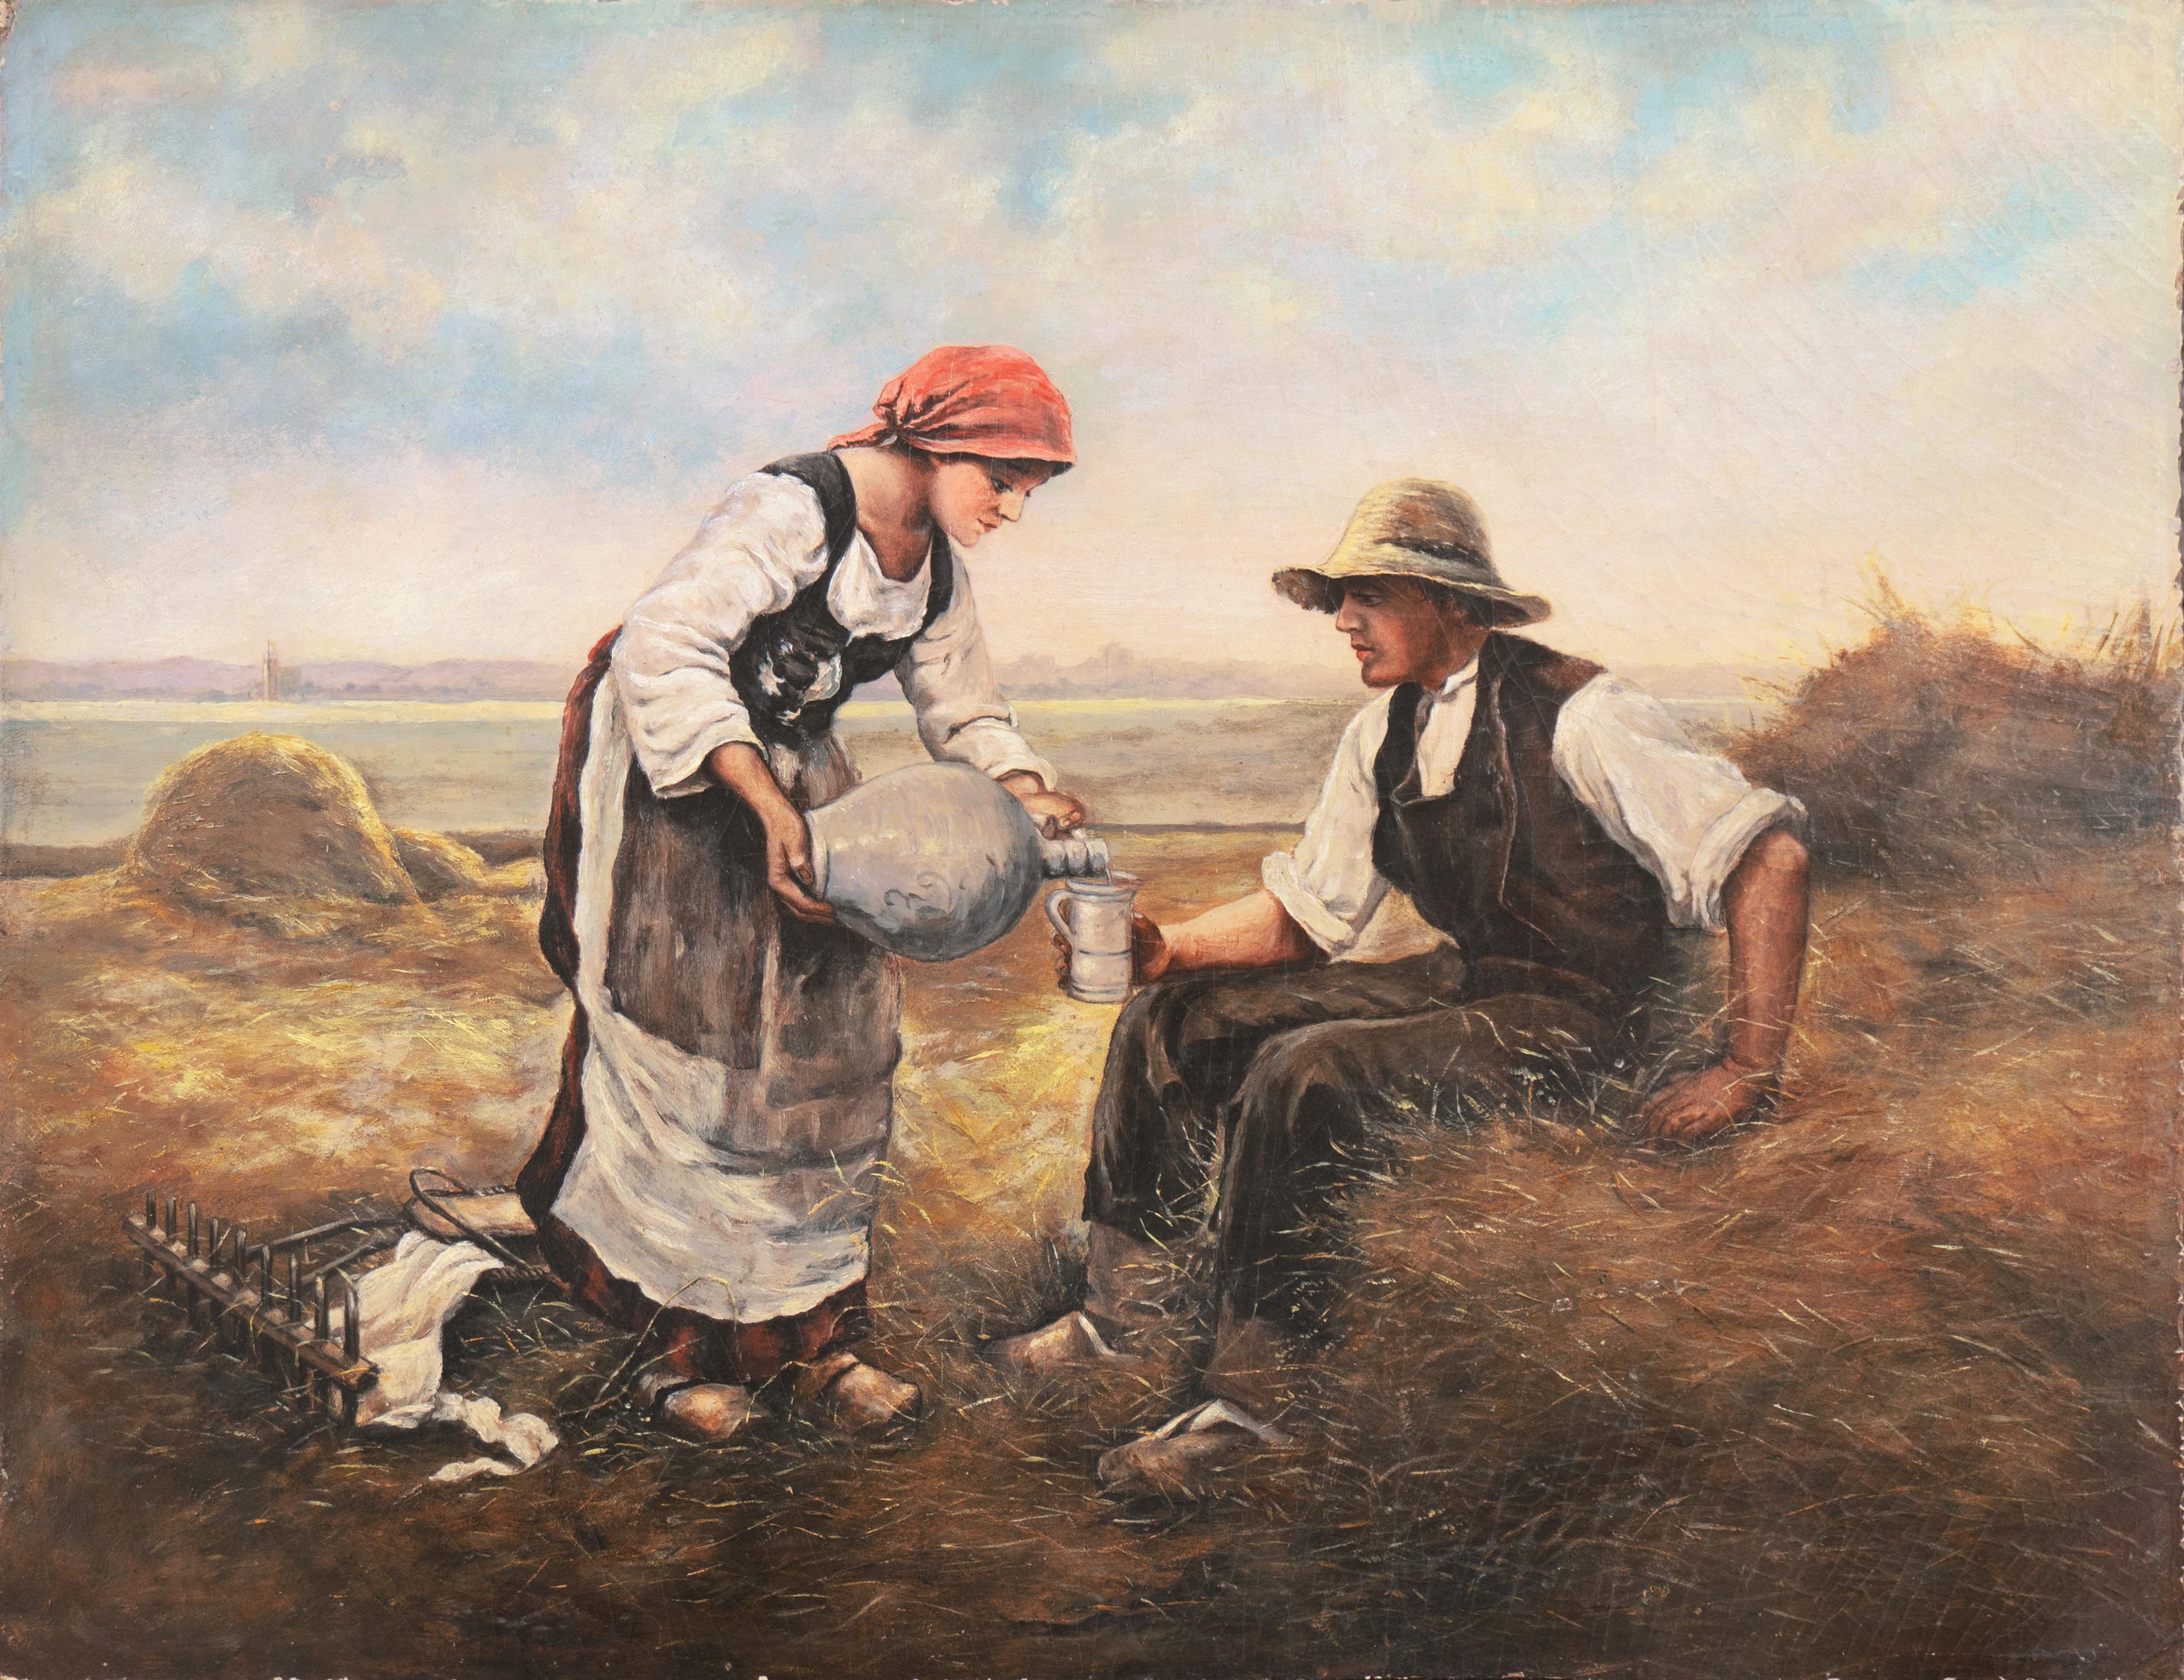 Unknown Figurative Painting - 'The Midday Rest', Breton Figural Harvest Scene oil, Brittany Landscape